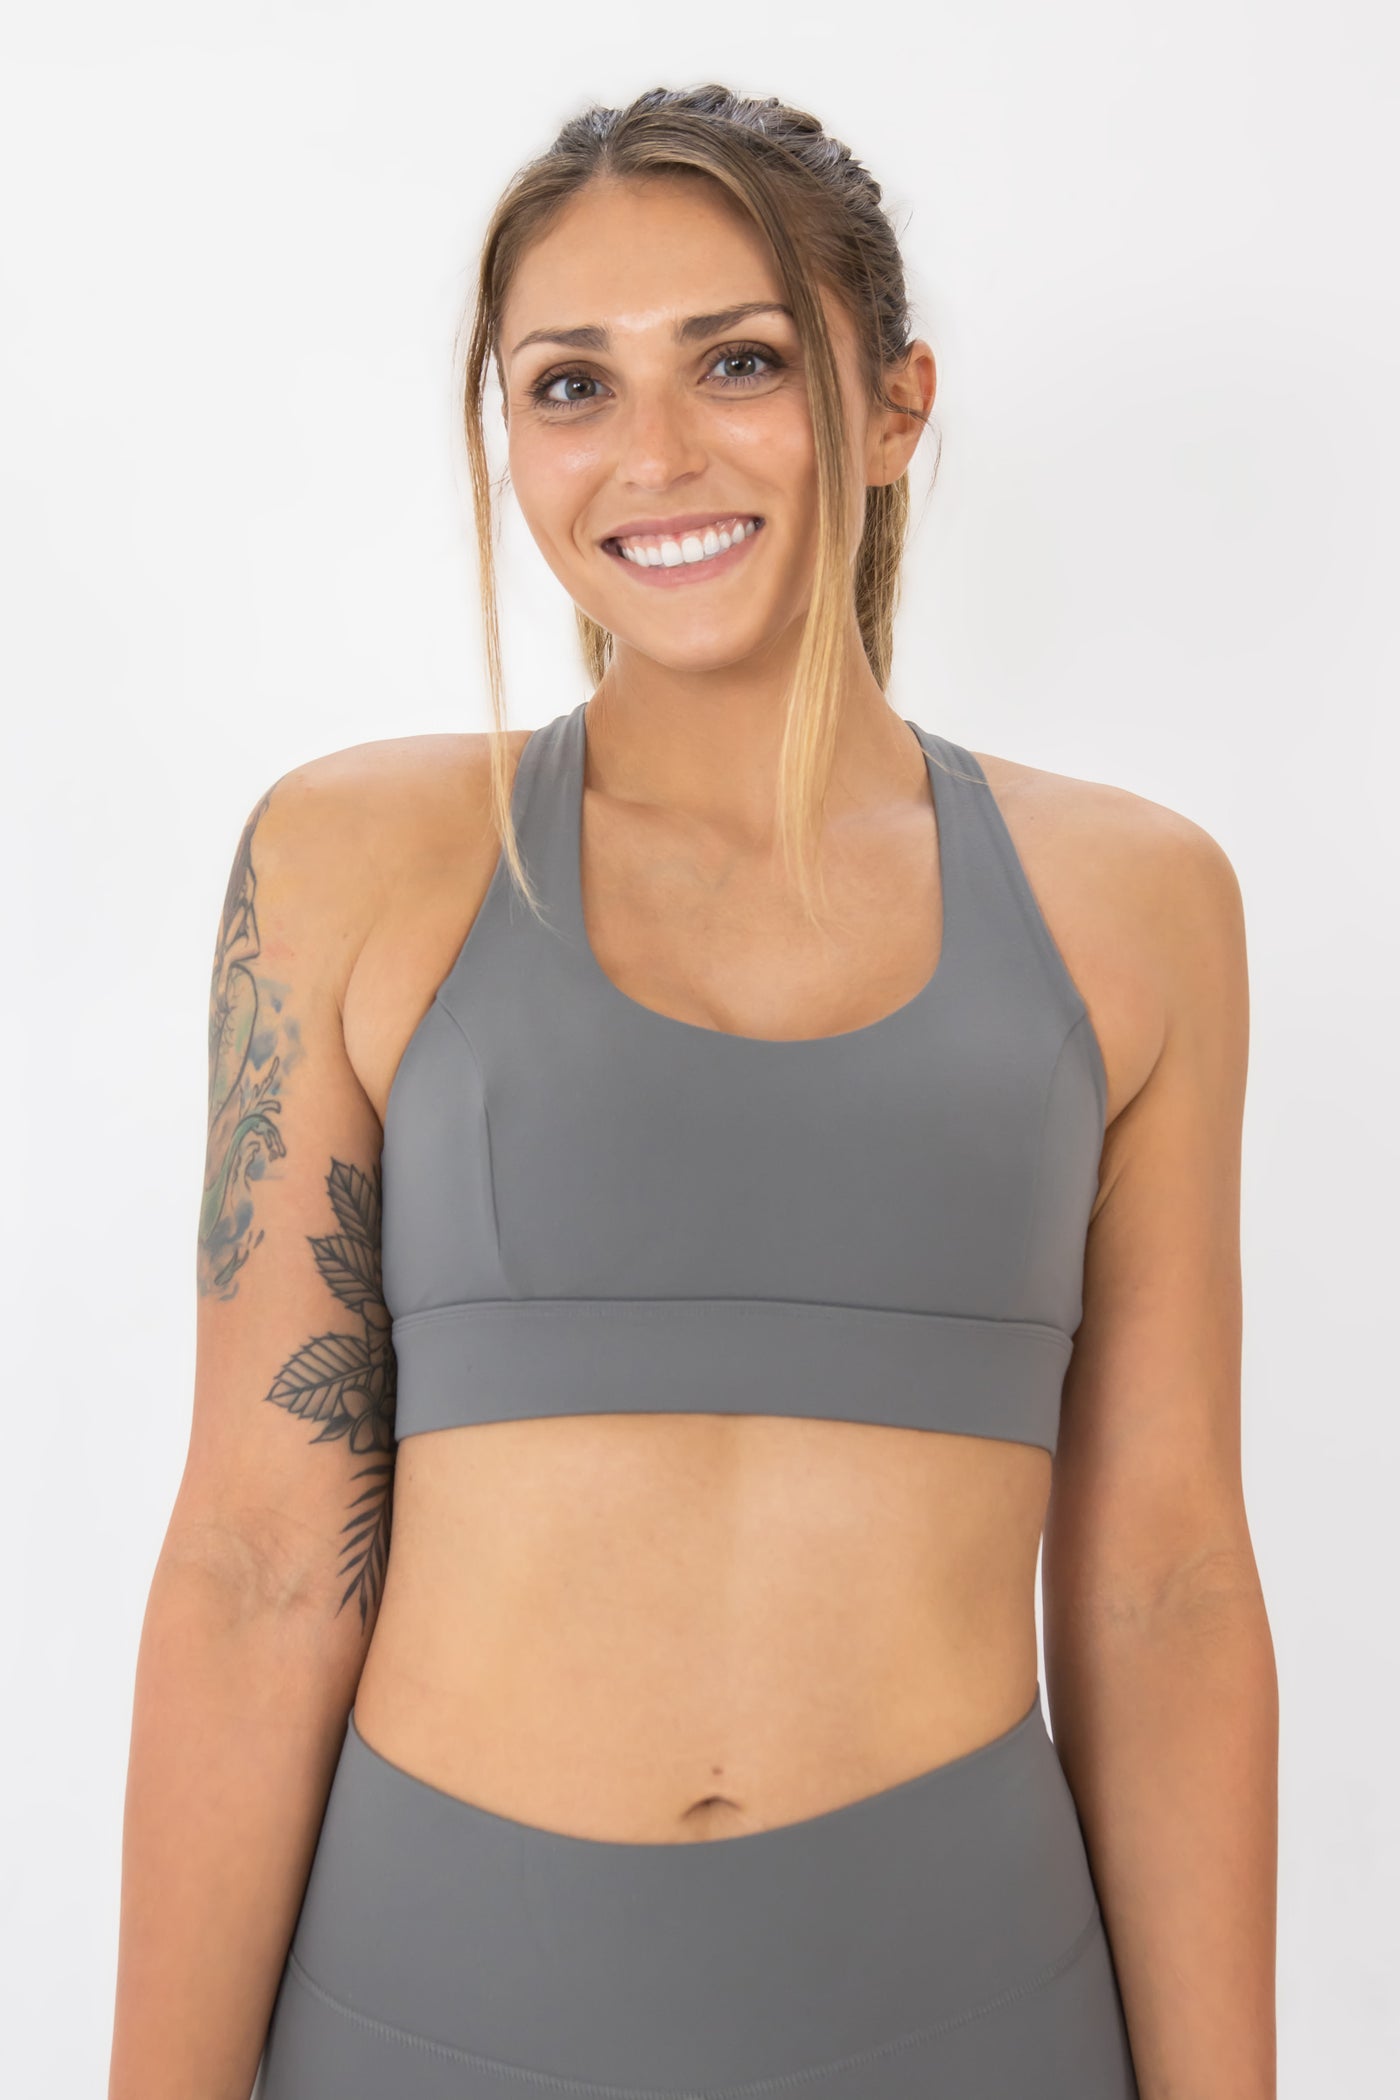 The Luna sports bra has wide, adjustable straps that are great for